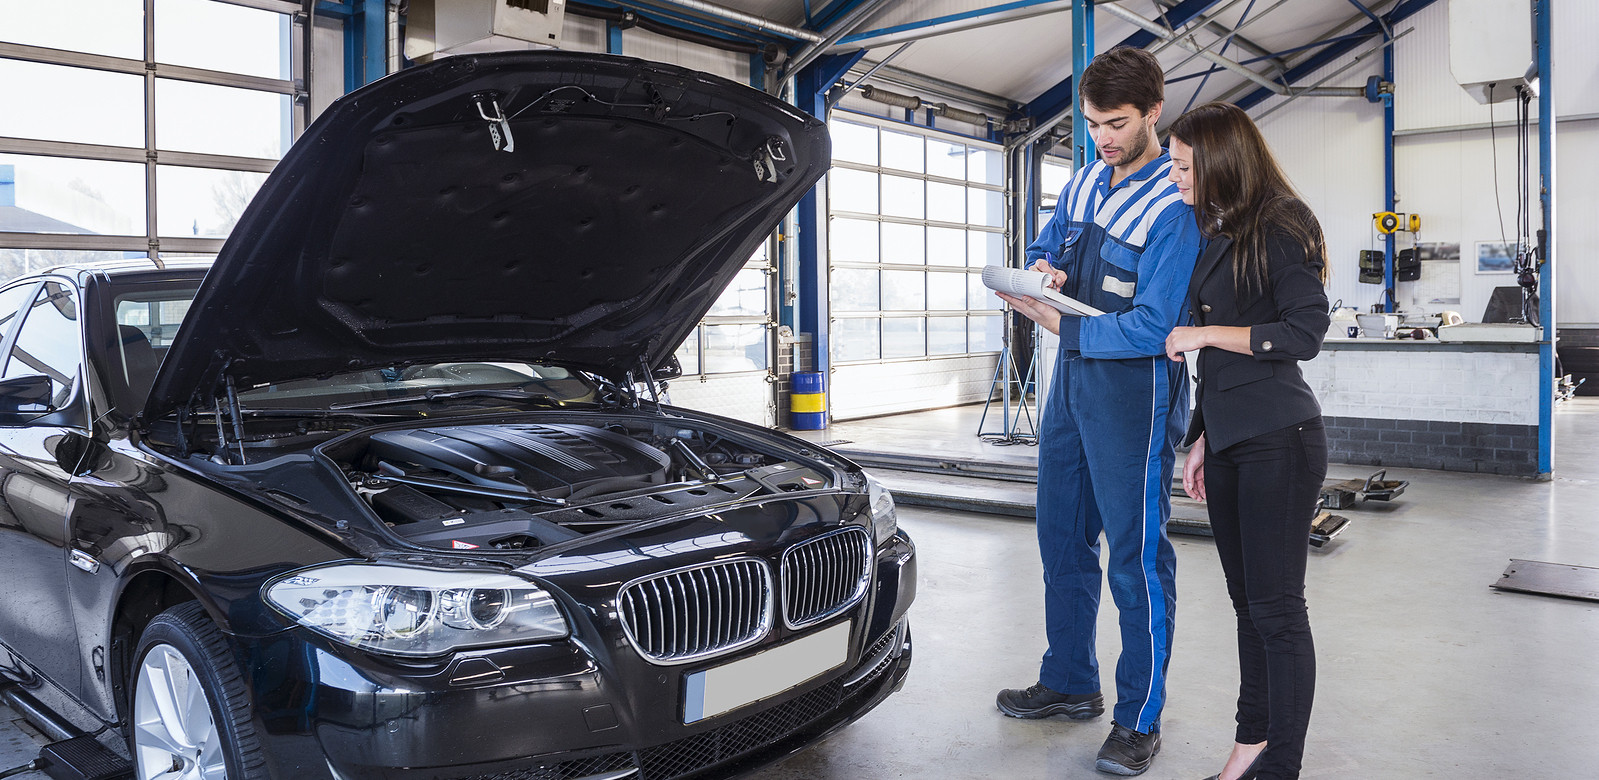 Mechanic with clipboard and and female customer standing to right of black BMW with bonnet open.